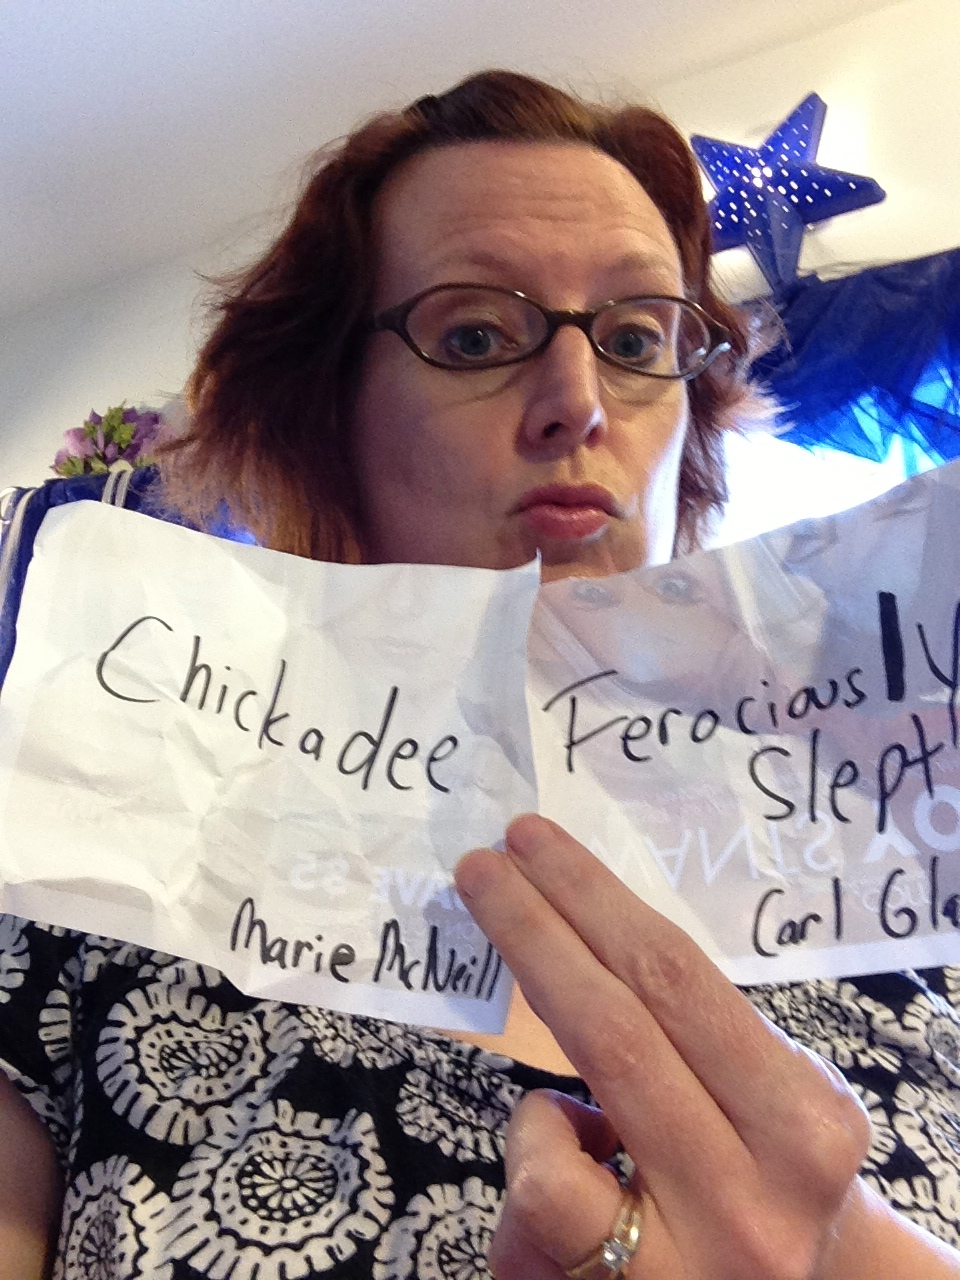 Photo of Rebecca Hicks holding pieces of paper reading “Chickadee” and “Ferociously Slept”